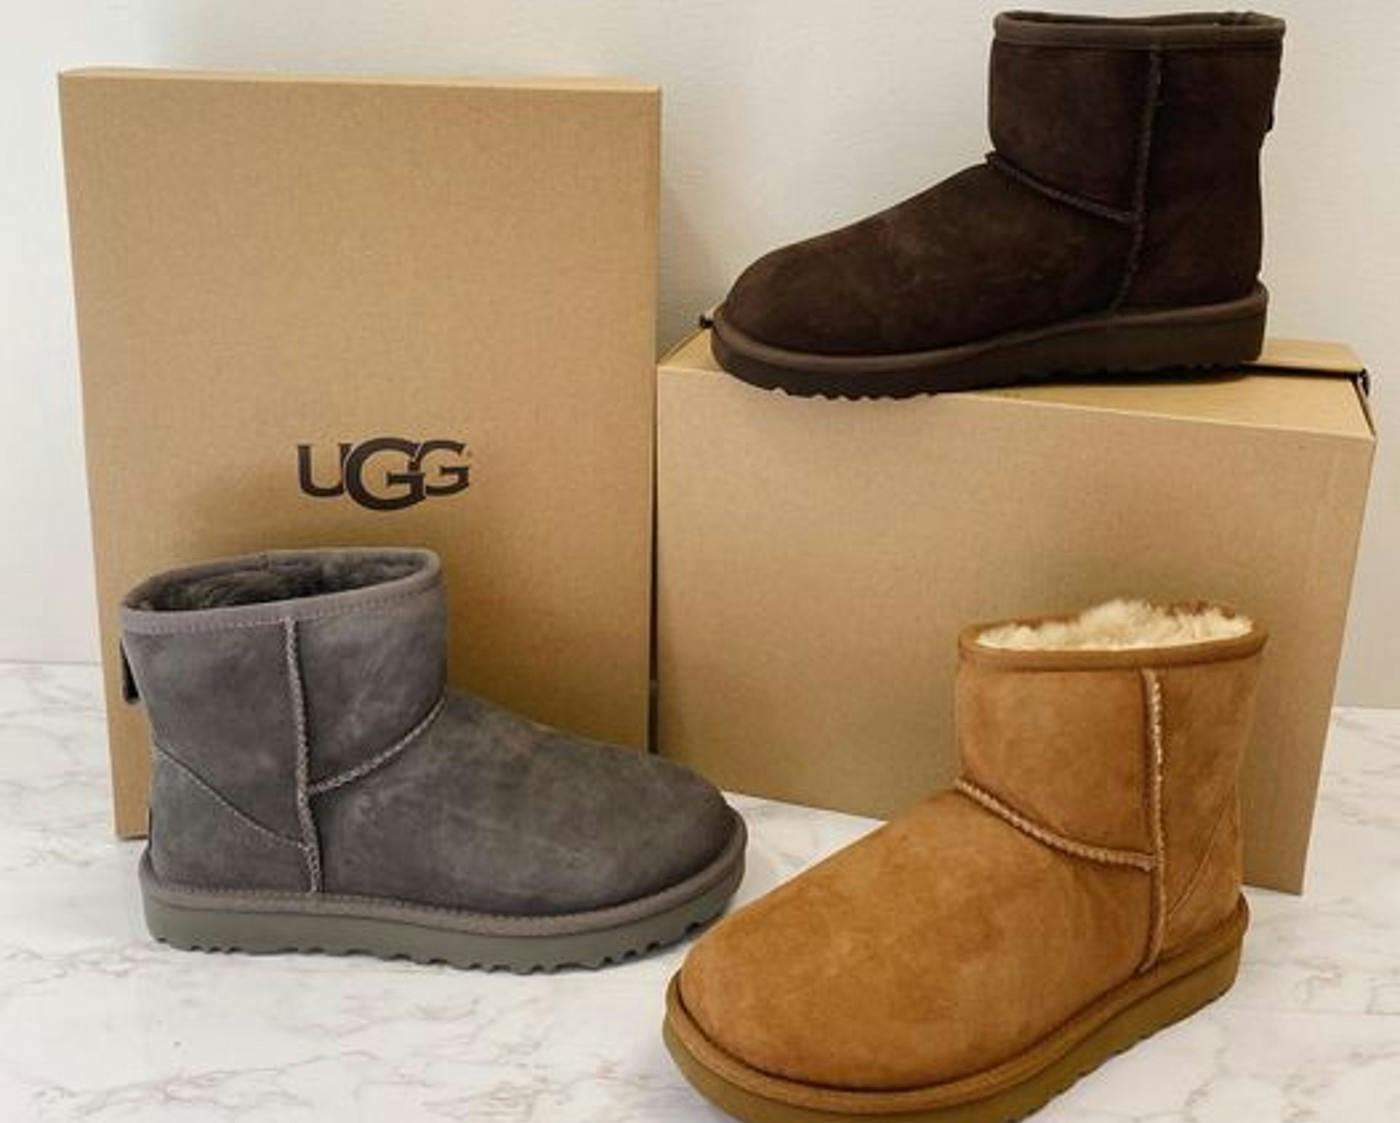 inexpensive ugg boots where to find them